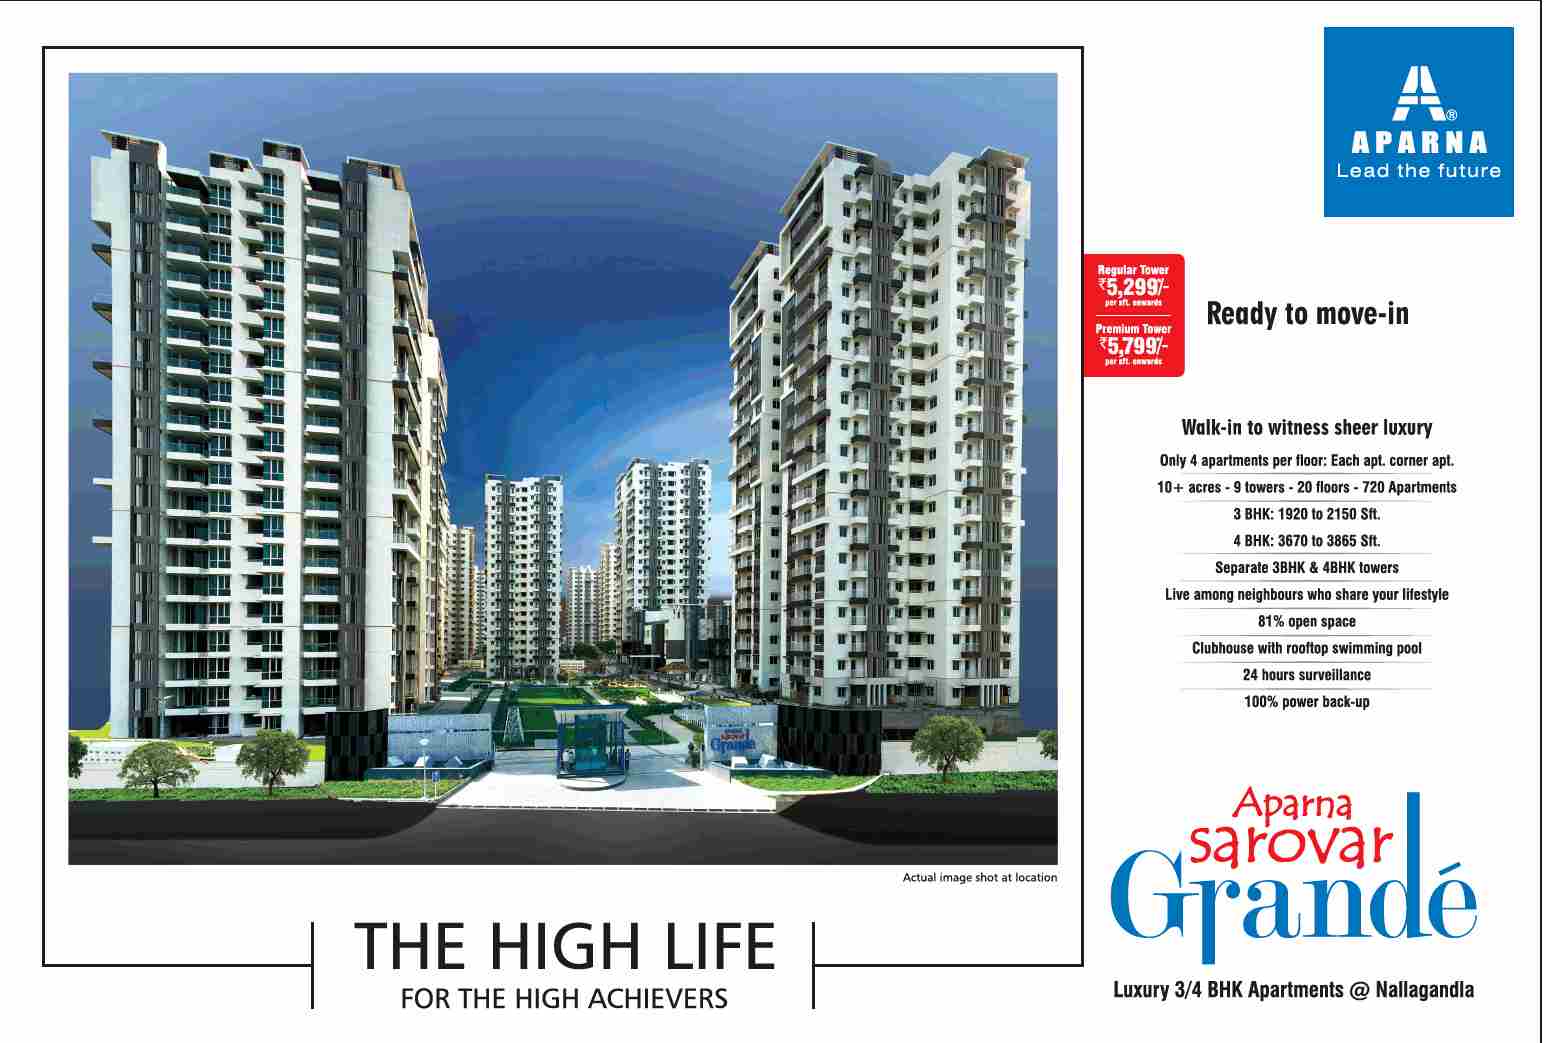 Aparna Sarovar Grande - The high life for the high achievers in Hyderabad